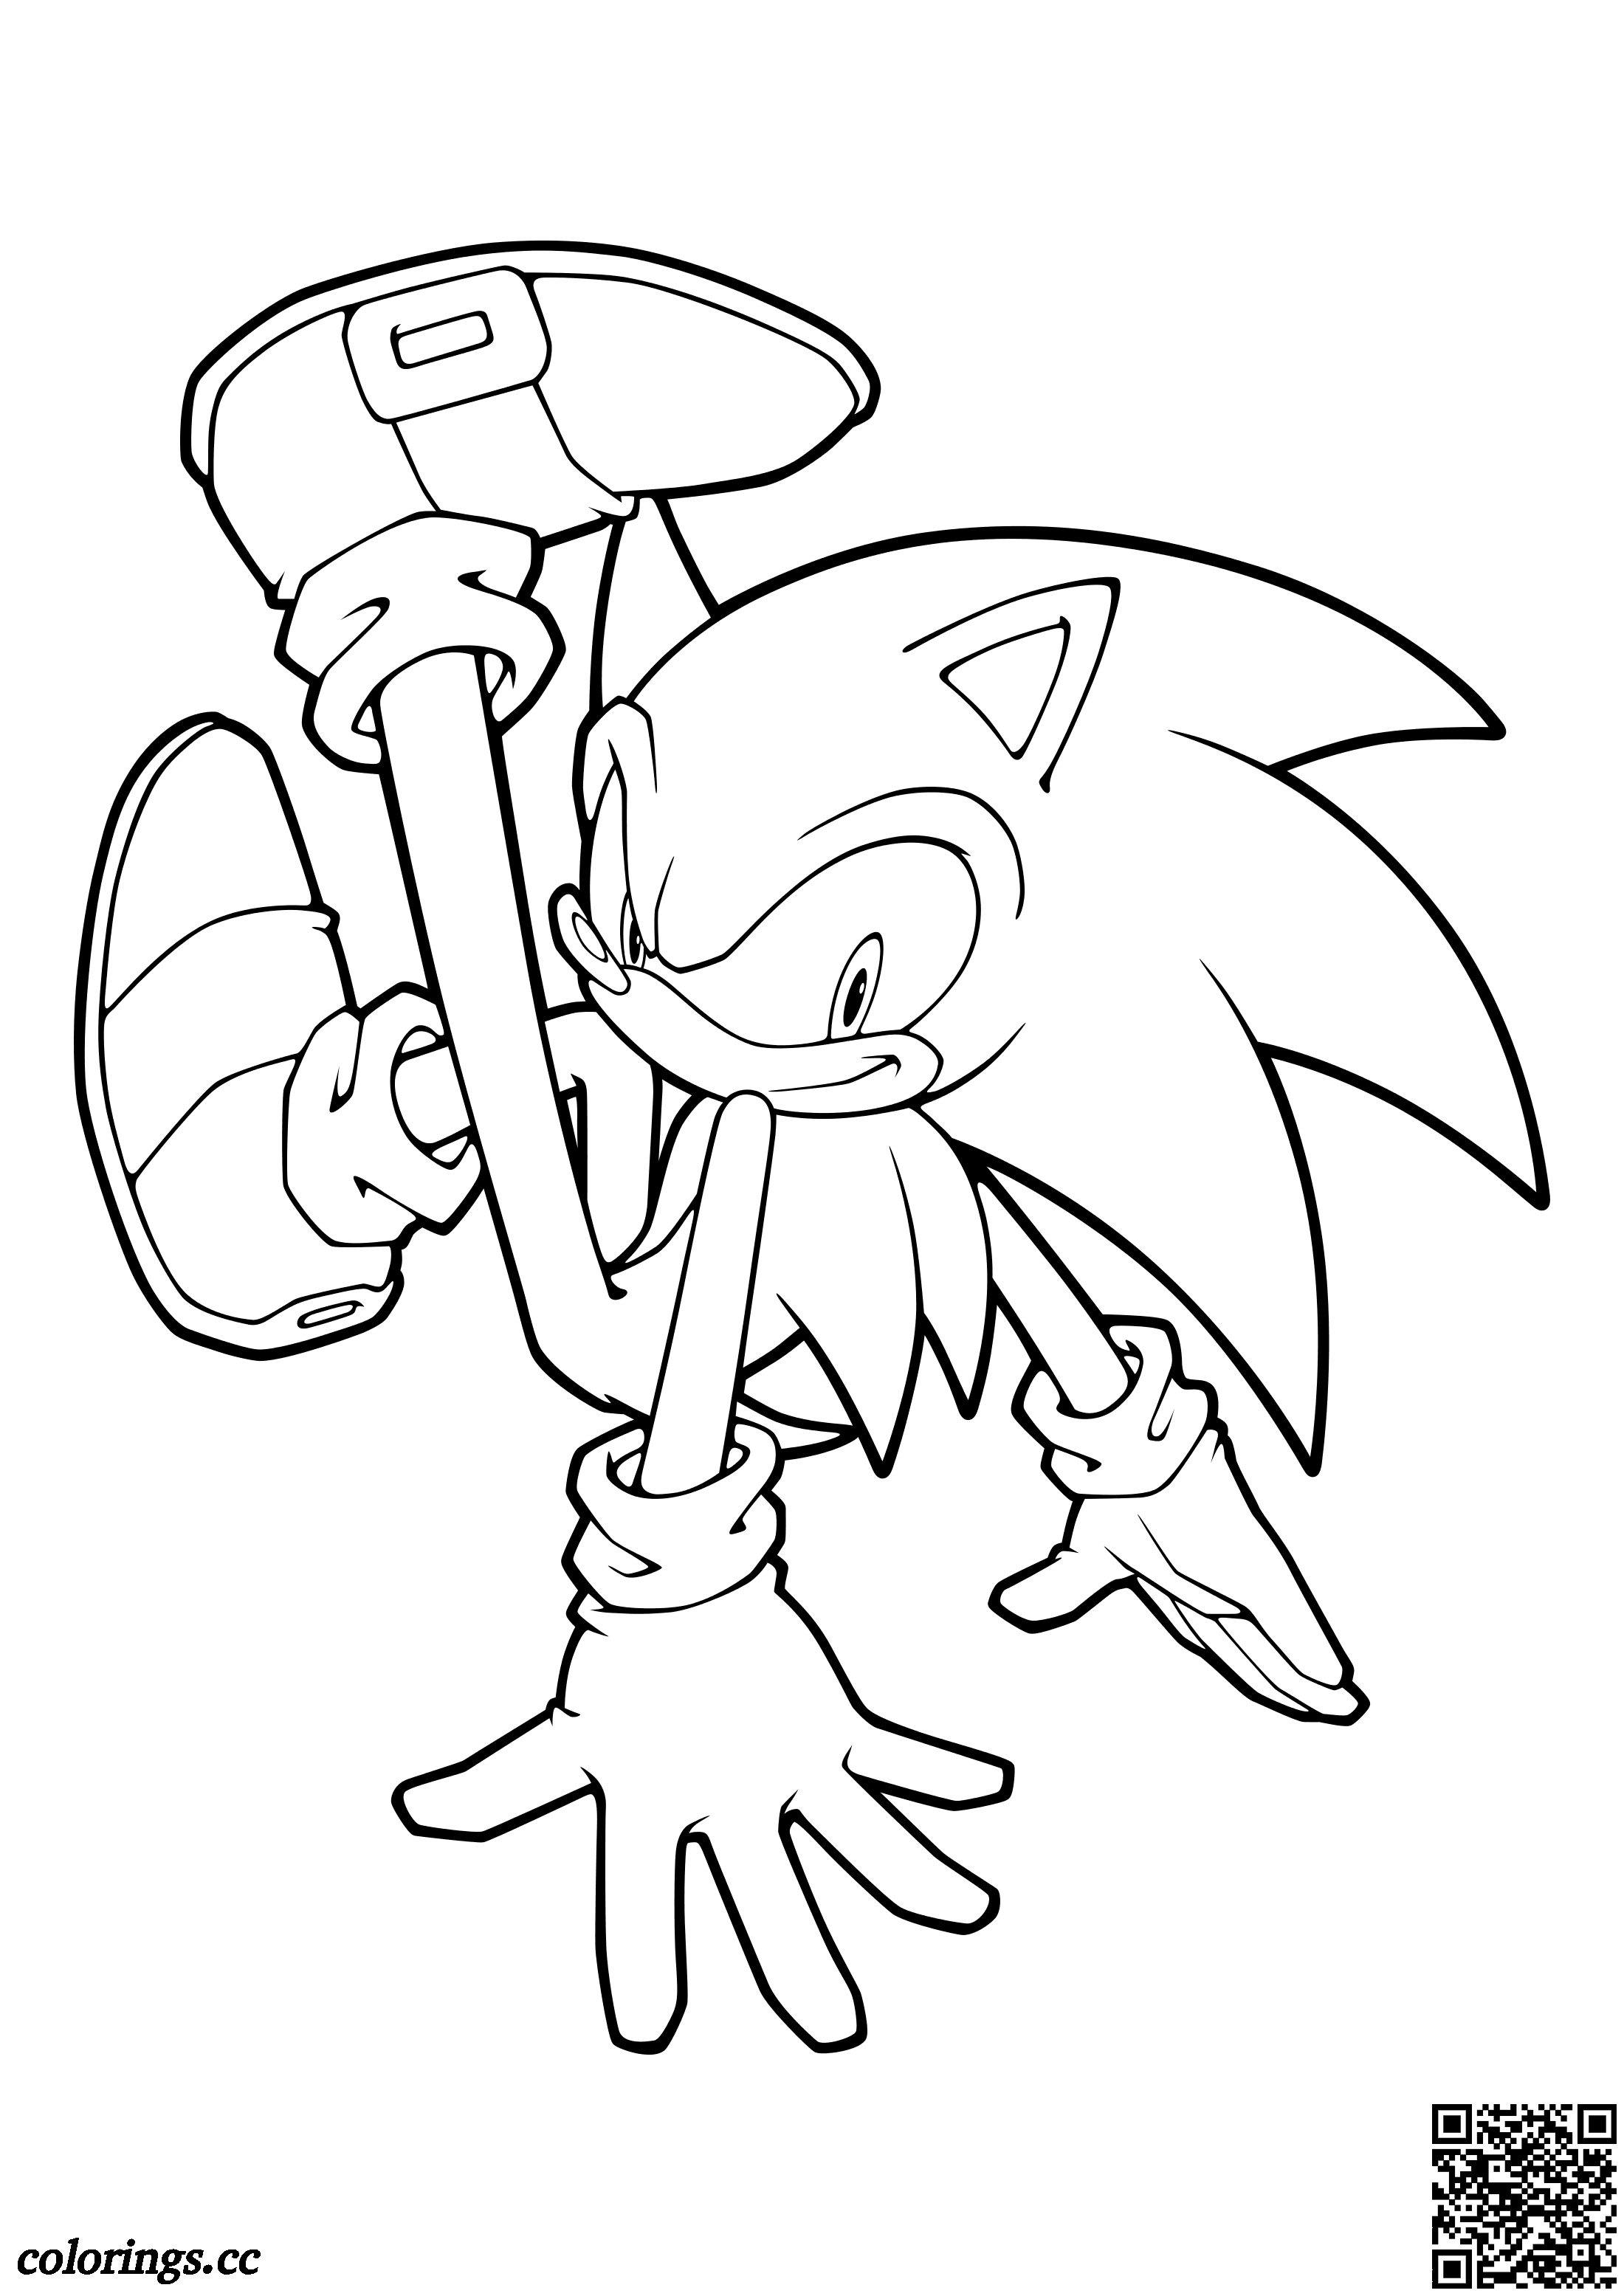 Slick sonic the hedgehog coloring pages sonic the hedgehog coloring pages